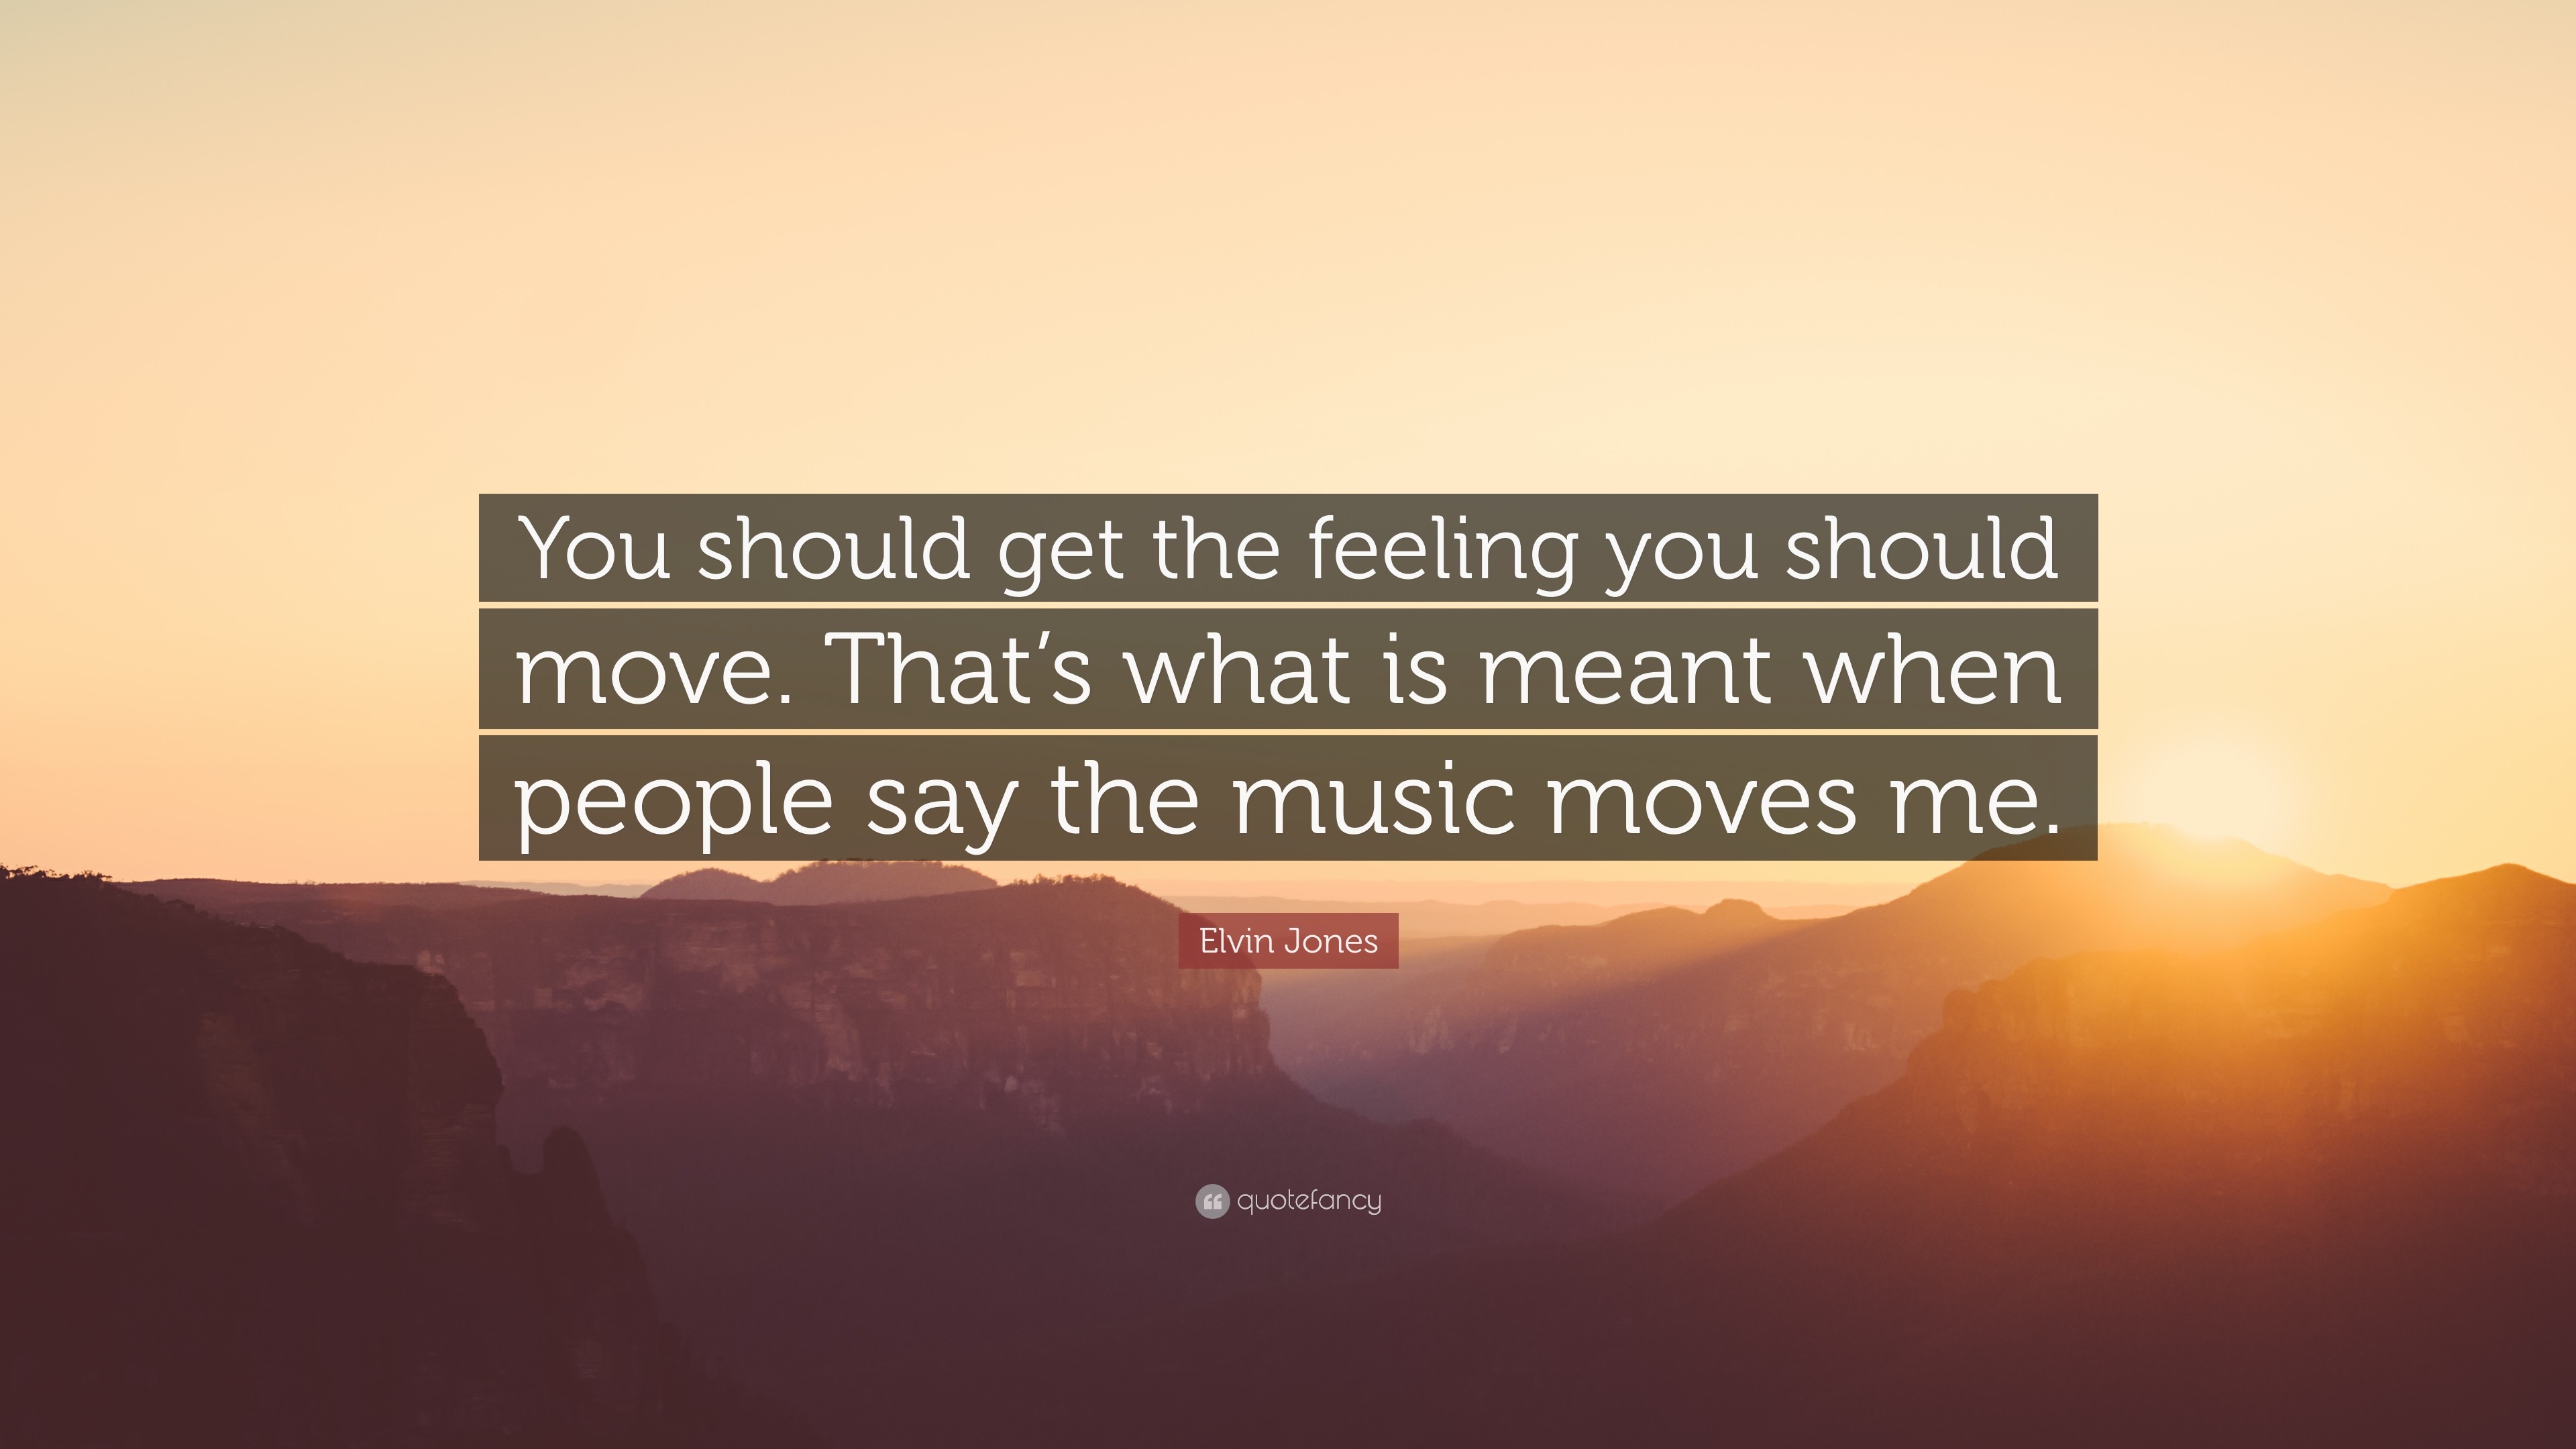 3840x2160 Elvin Jones Quote: “You should get the feeling you should move. That's what